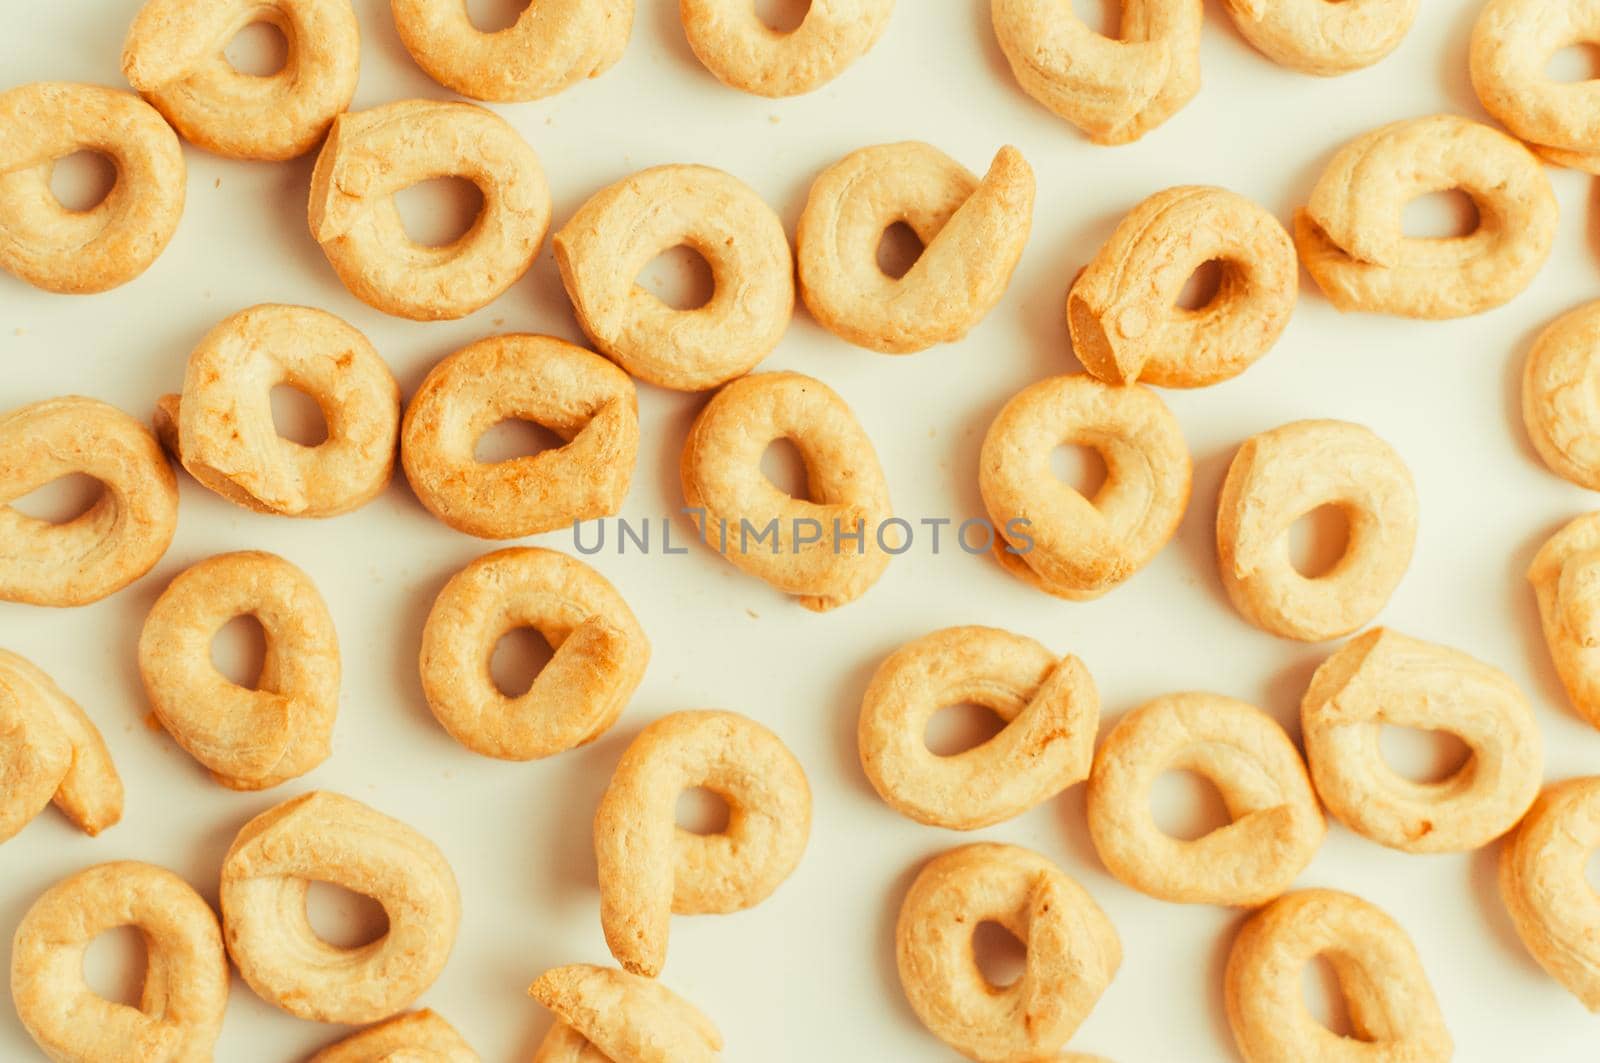 Taralli - a traditional Italian snack similar to drying or bagels, typical for the cuisine of Sicily and Calabria. Bagel on a white background, isolate pattern. Copy space.